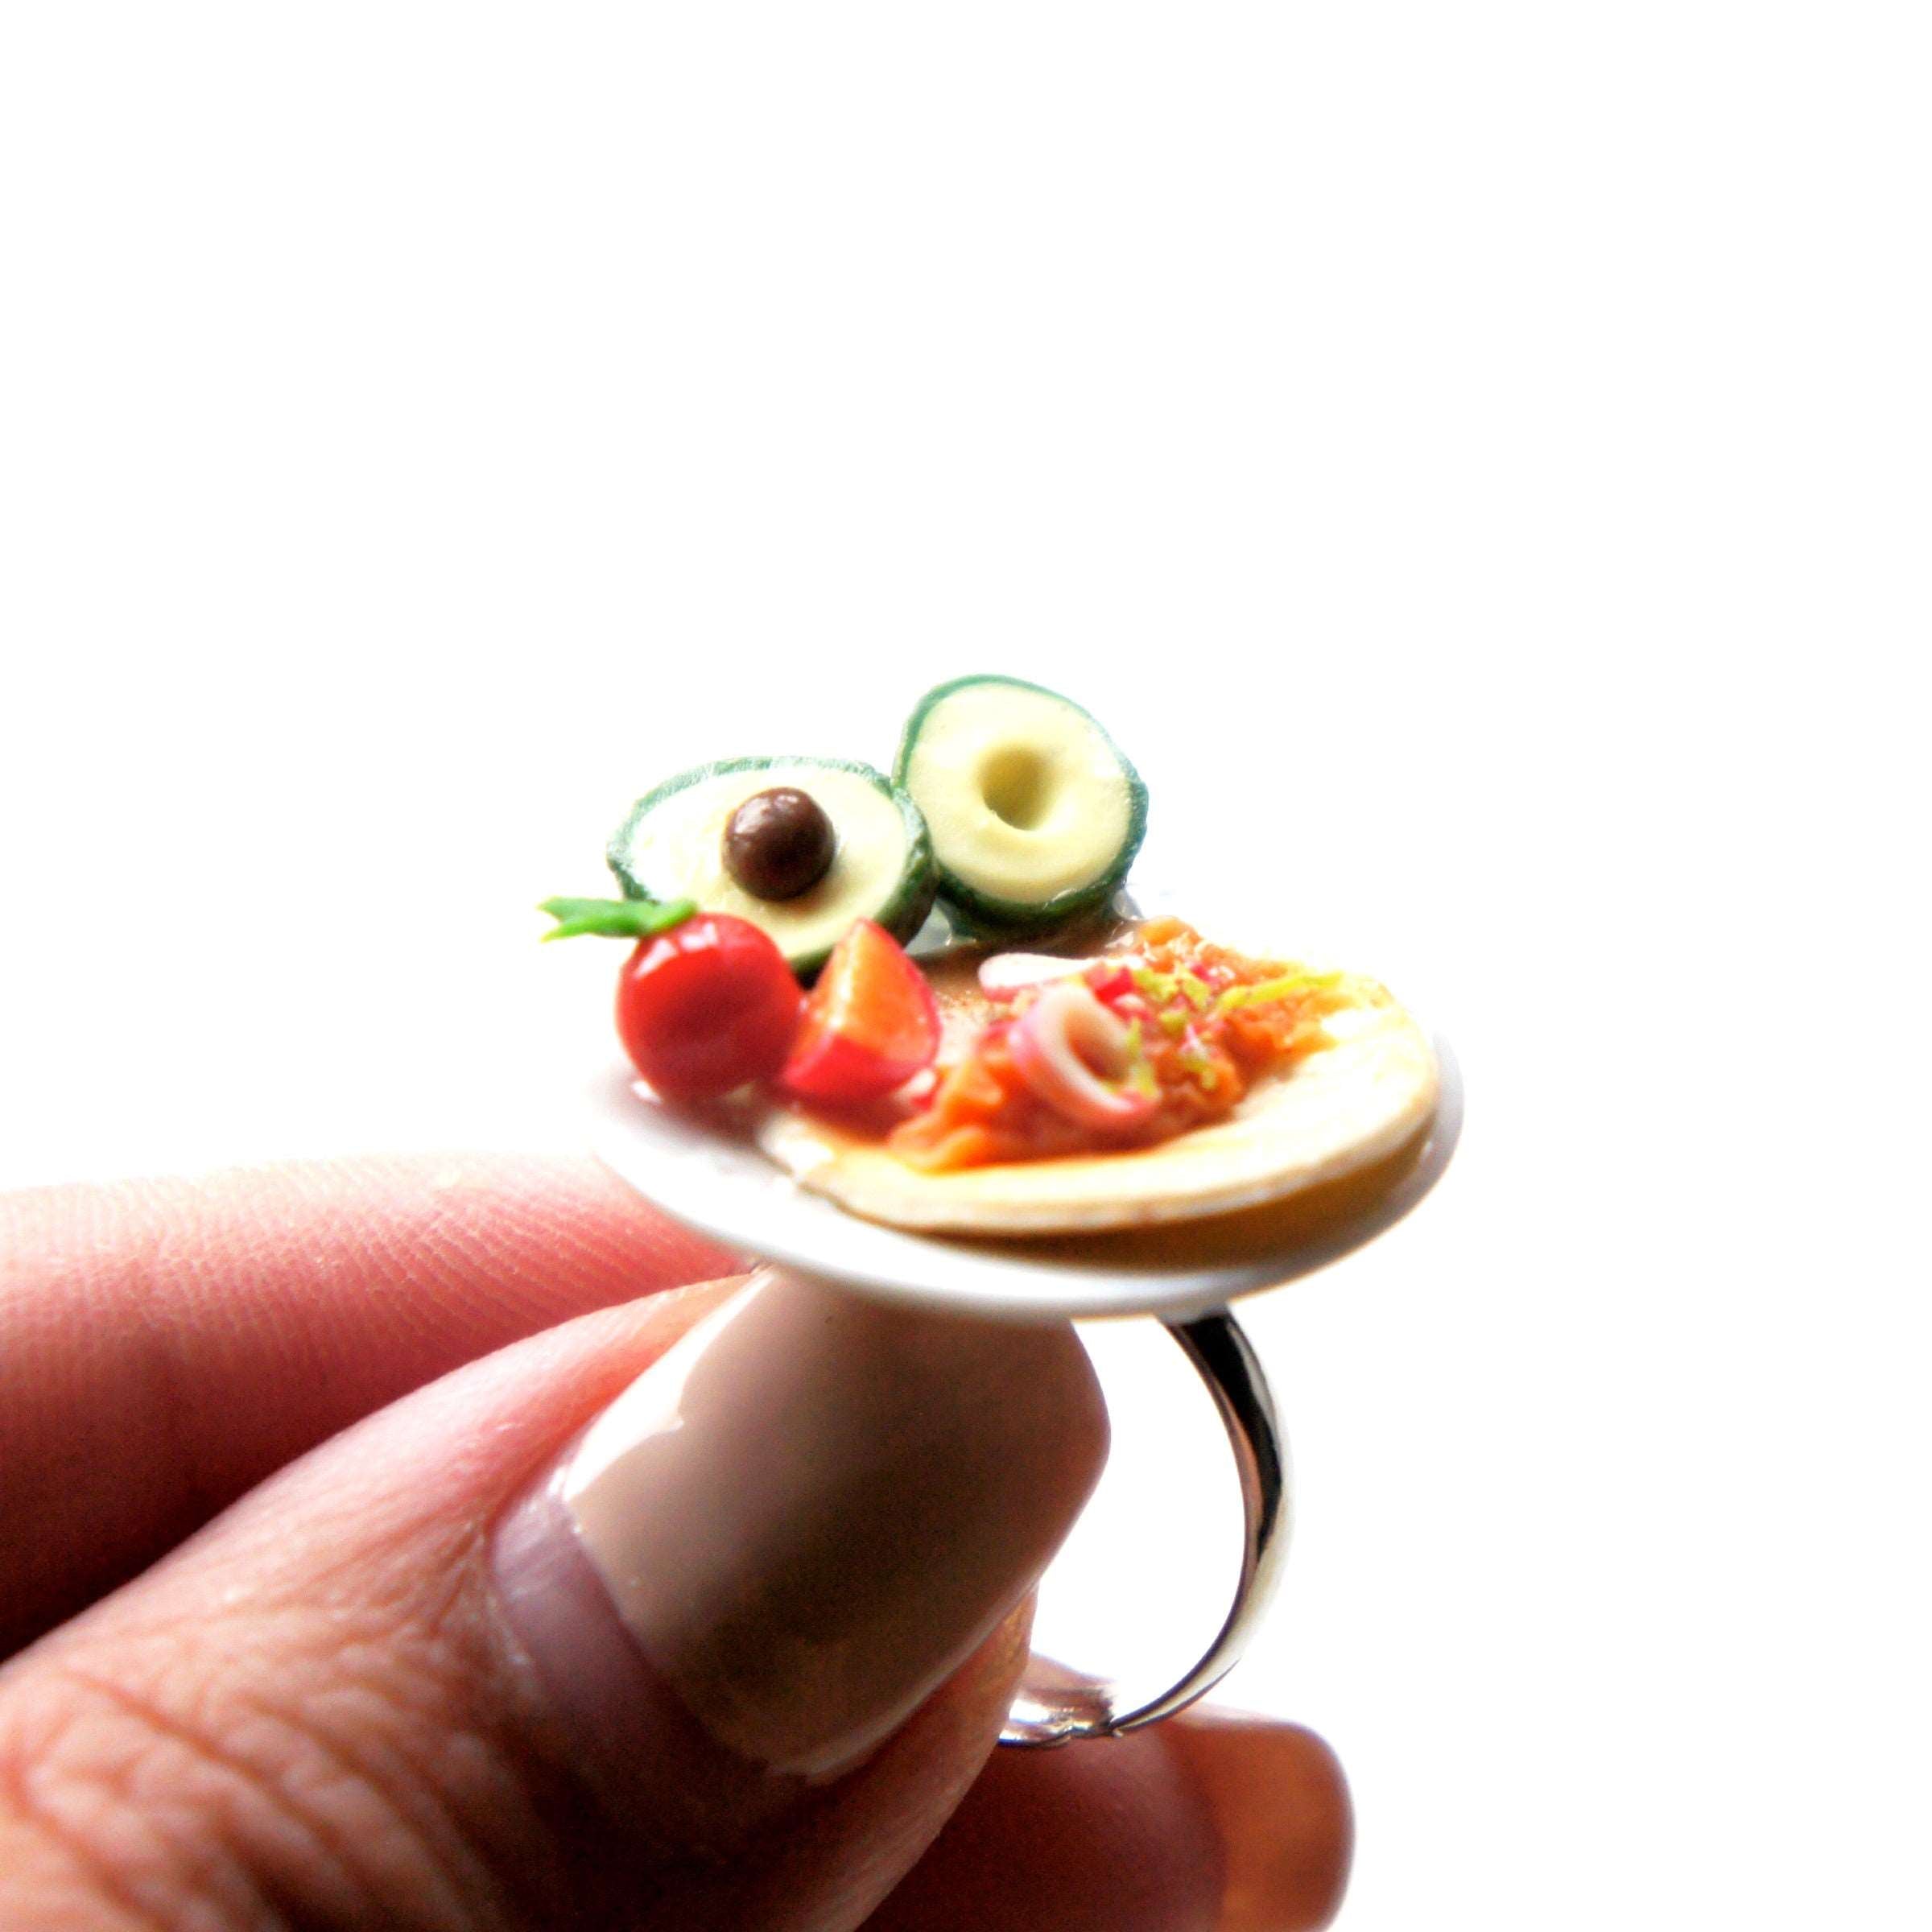 Burrito Ring - Jillicious charms and accessories